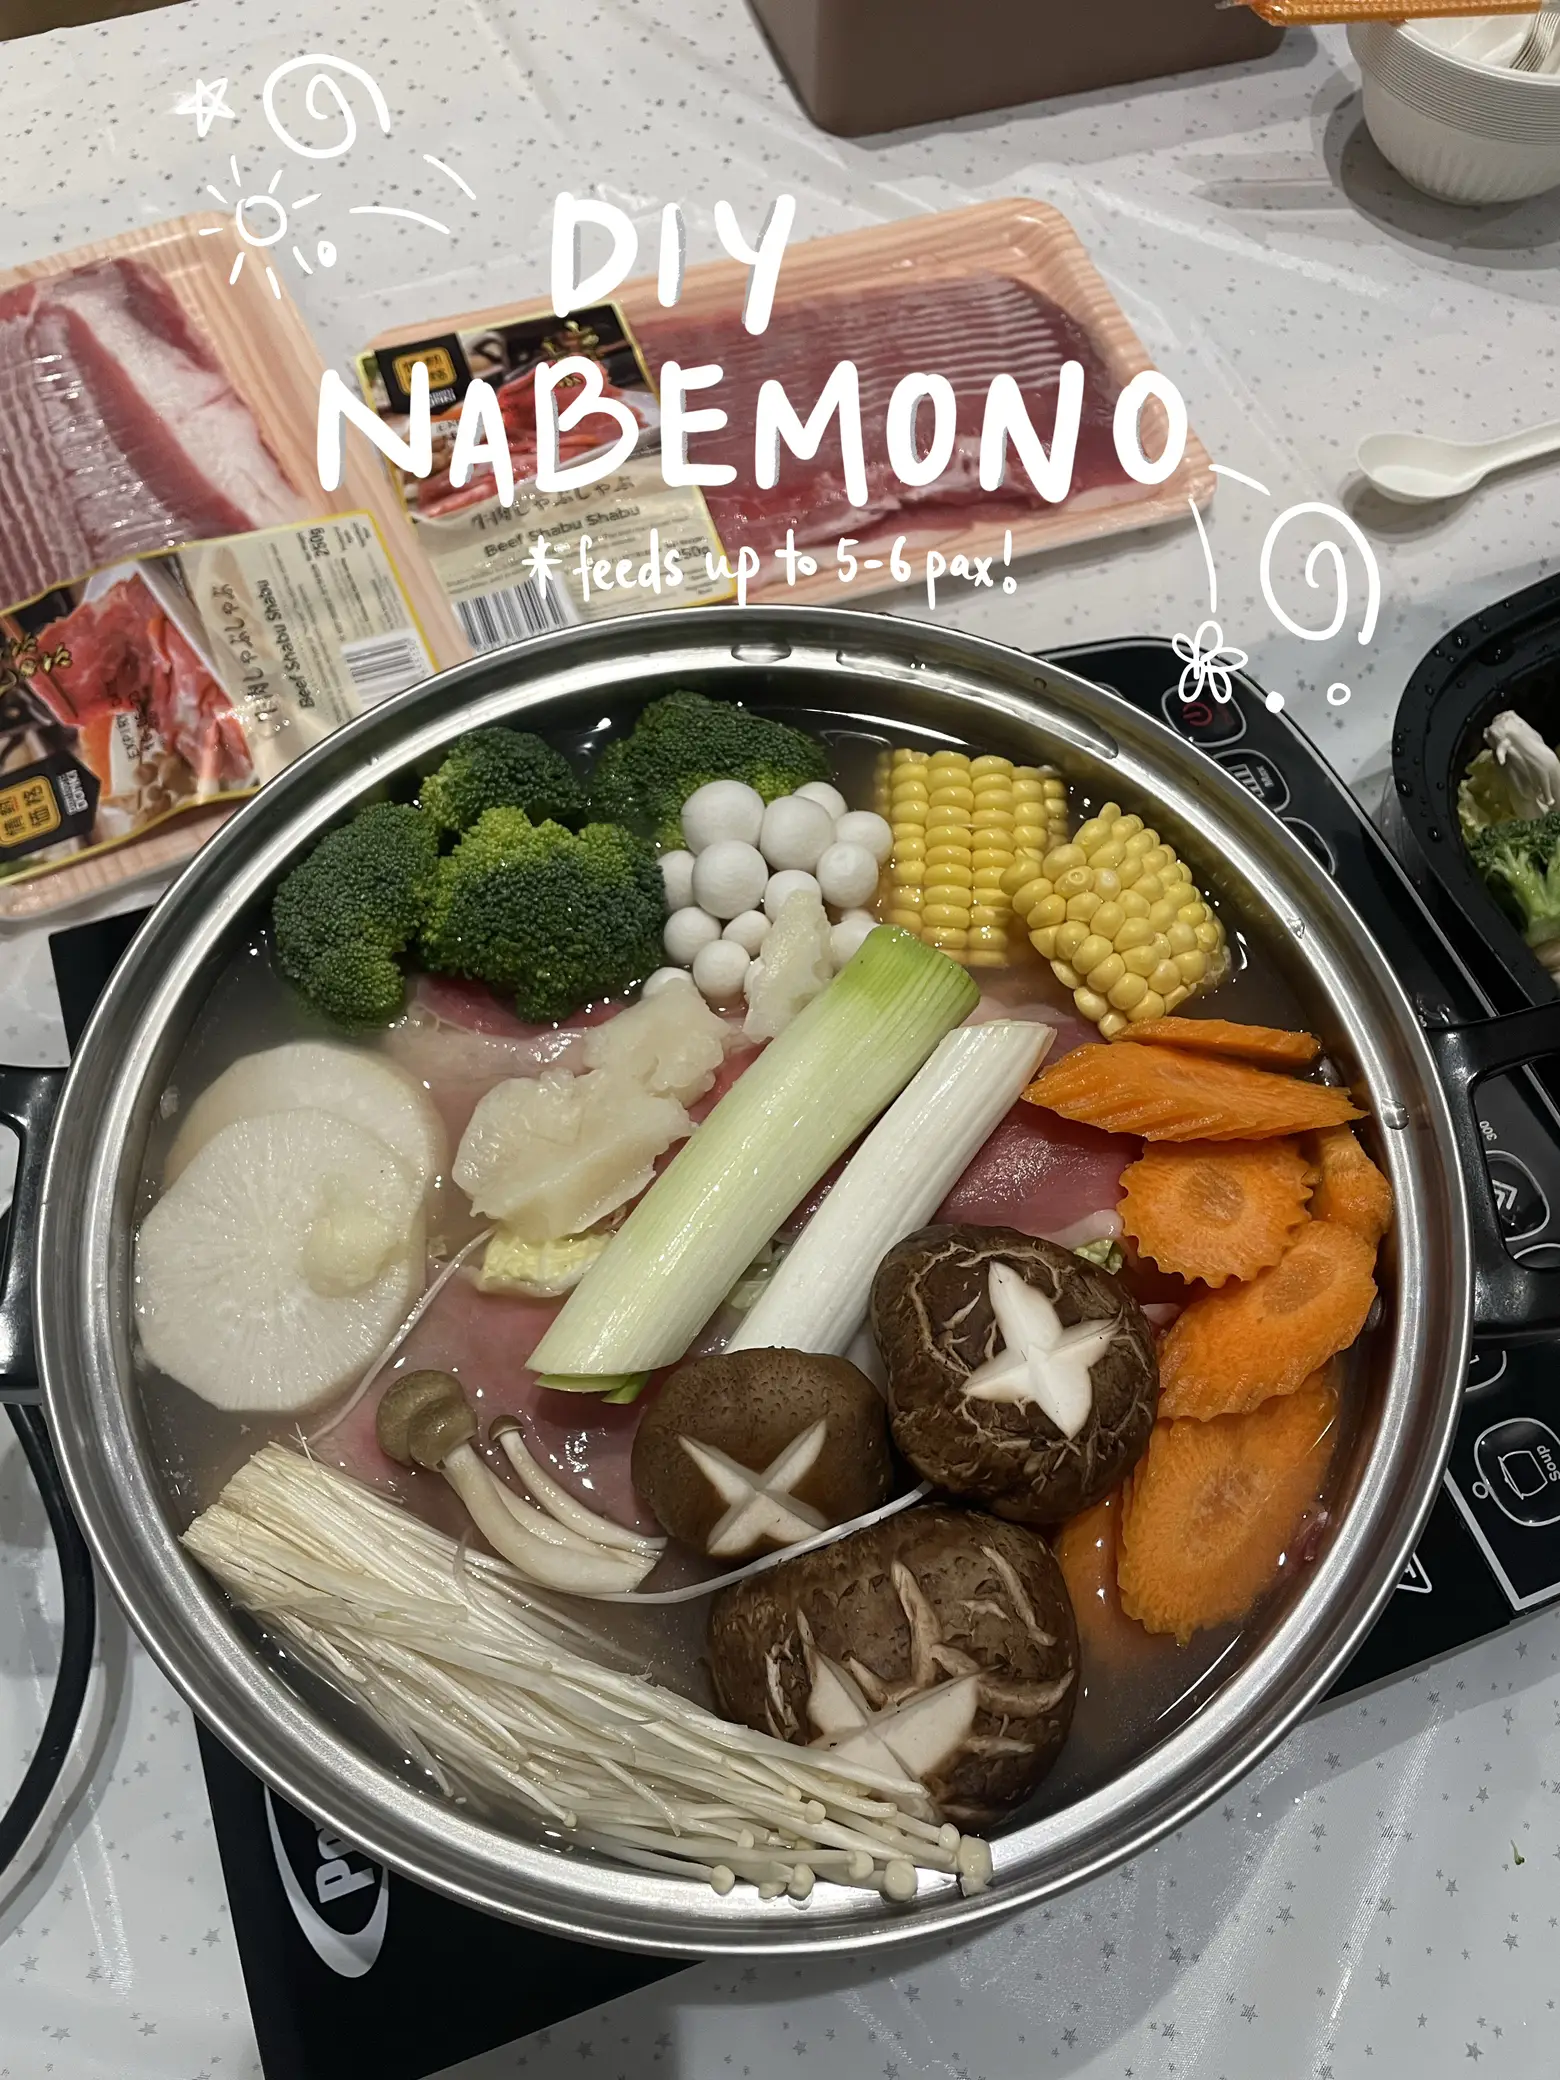 EASY nabemono for your next party🎉🍲, Gallery posted by fathungryduck